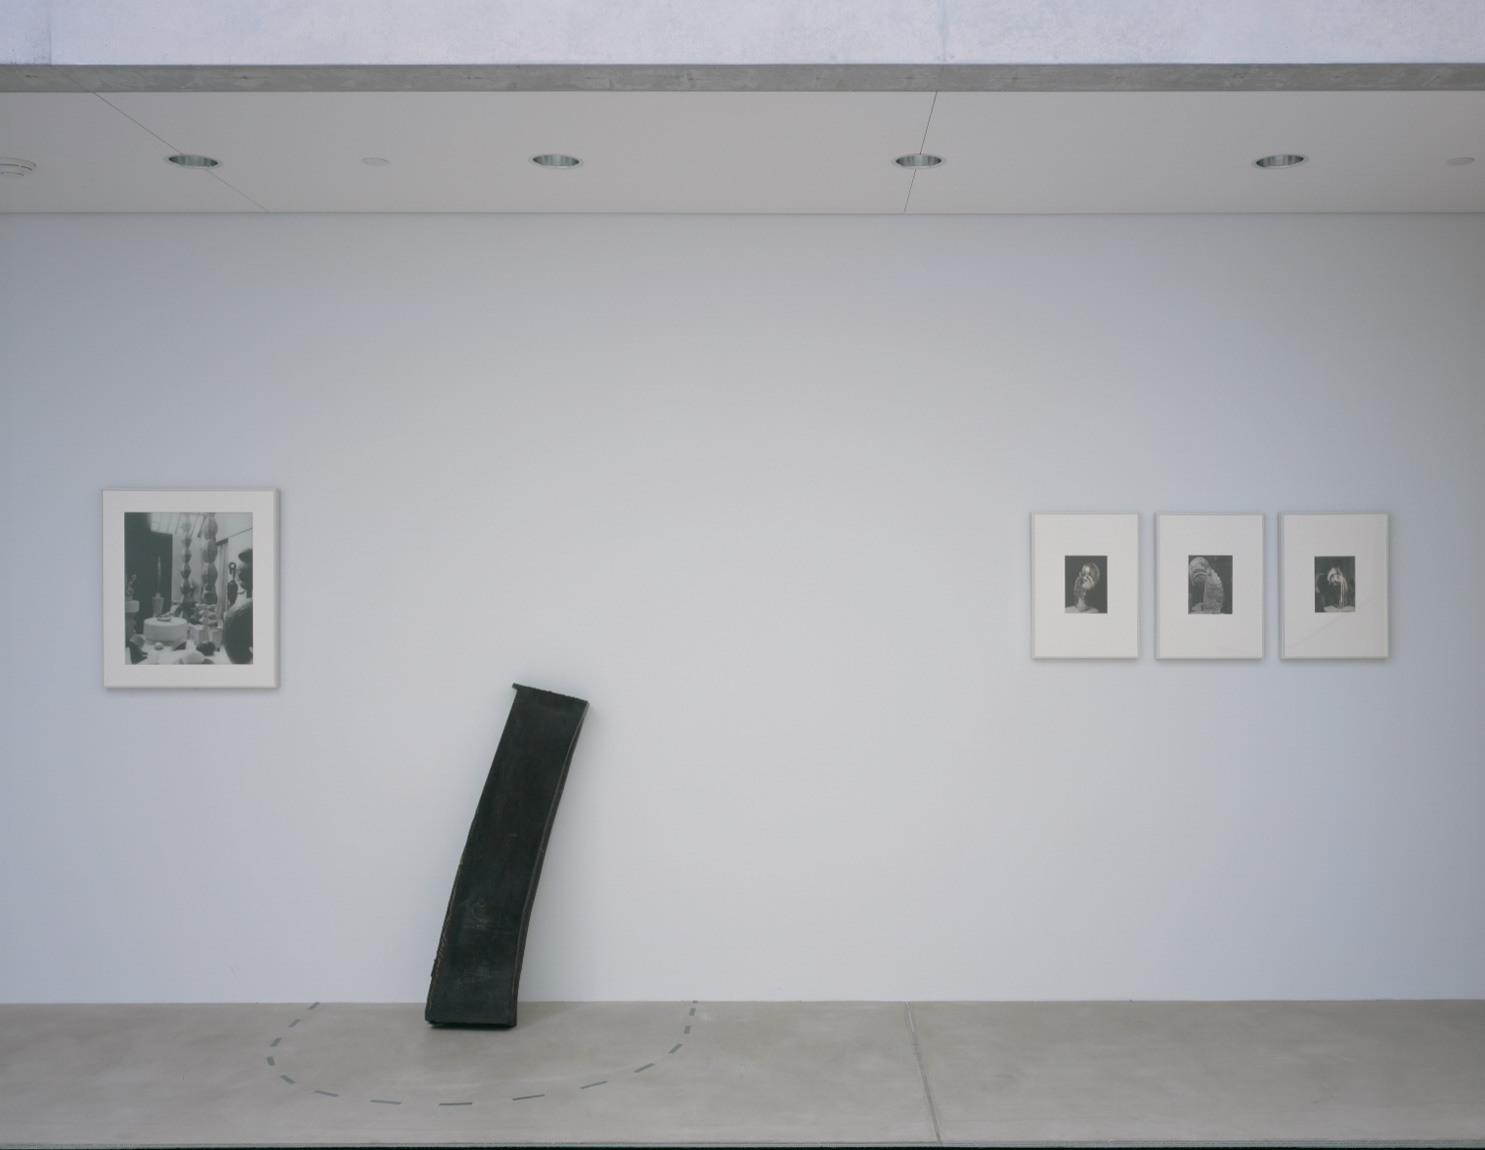 In the Lower Gallery: Brâncuși's silver print "The Studio," Serra's "Chunk," and three Brâncuși silver prints of different marble versions of "Mademoiselle Pogany II."